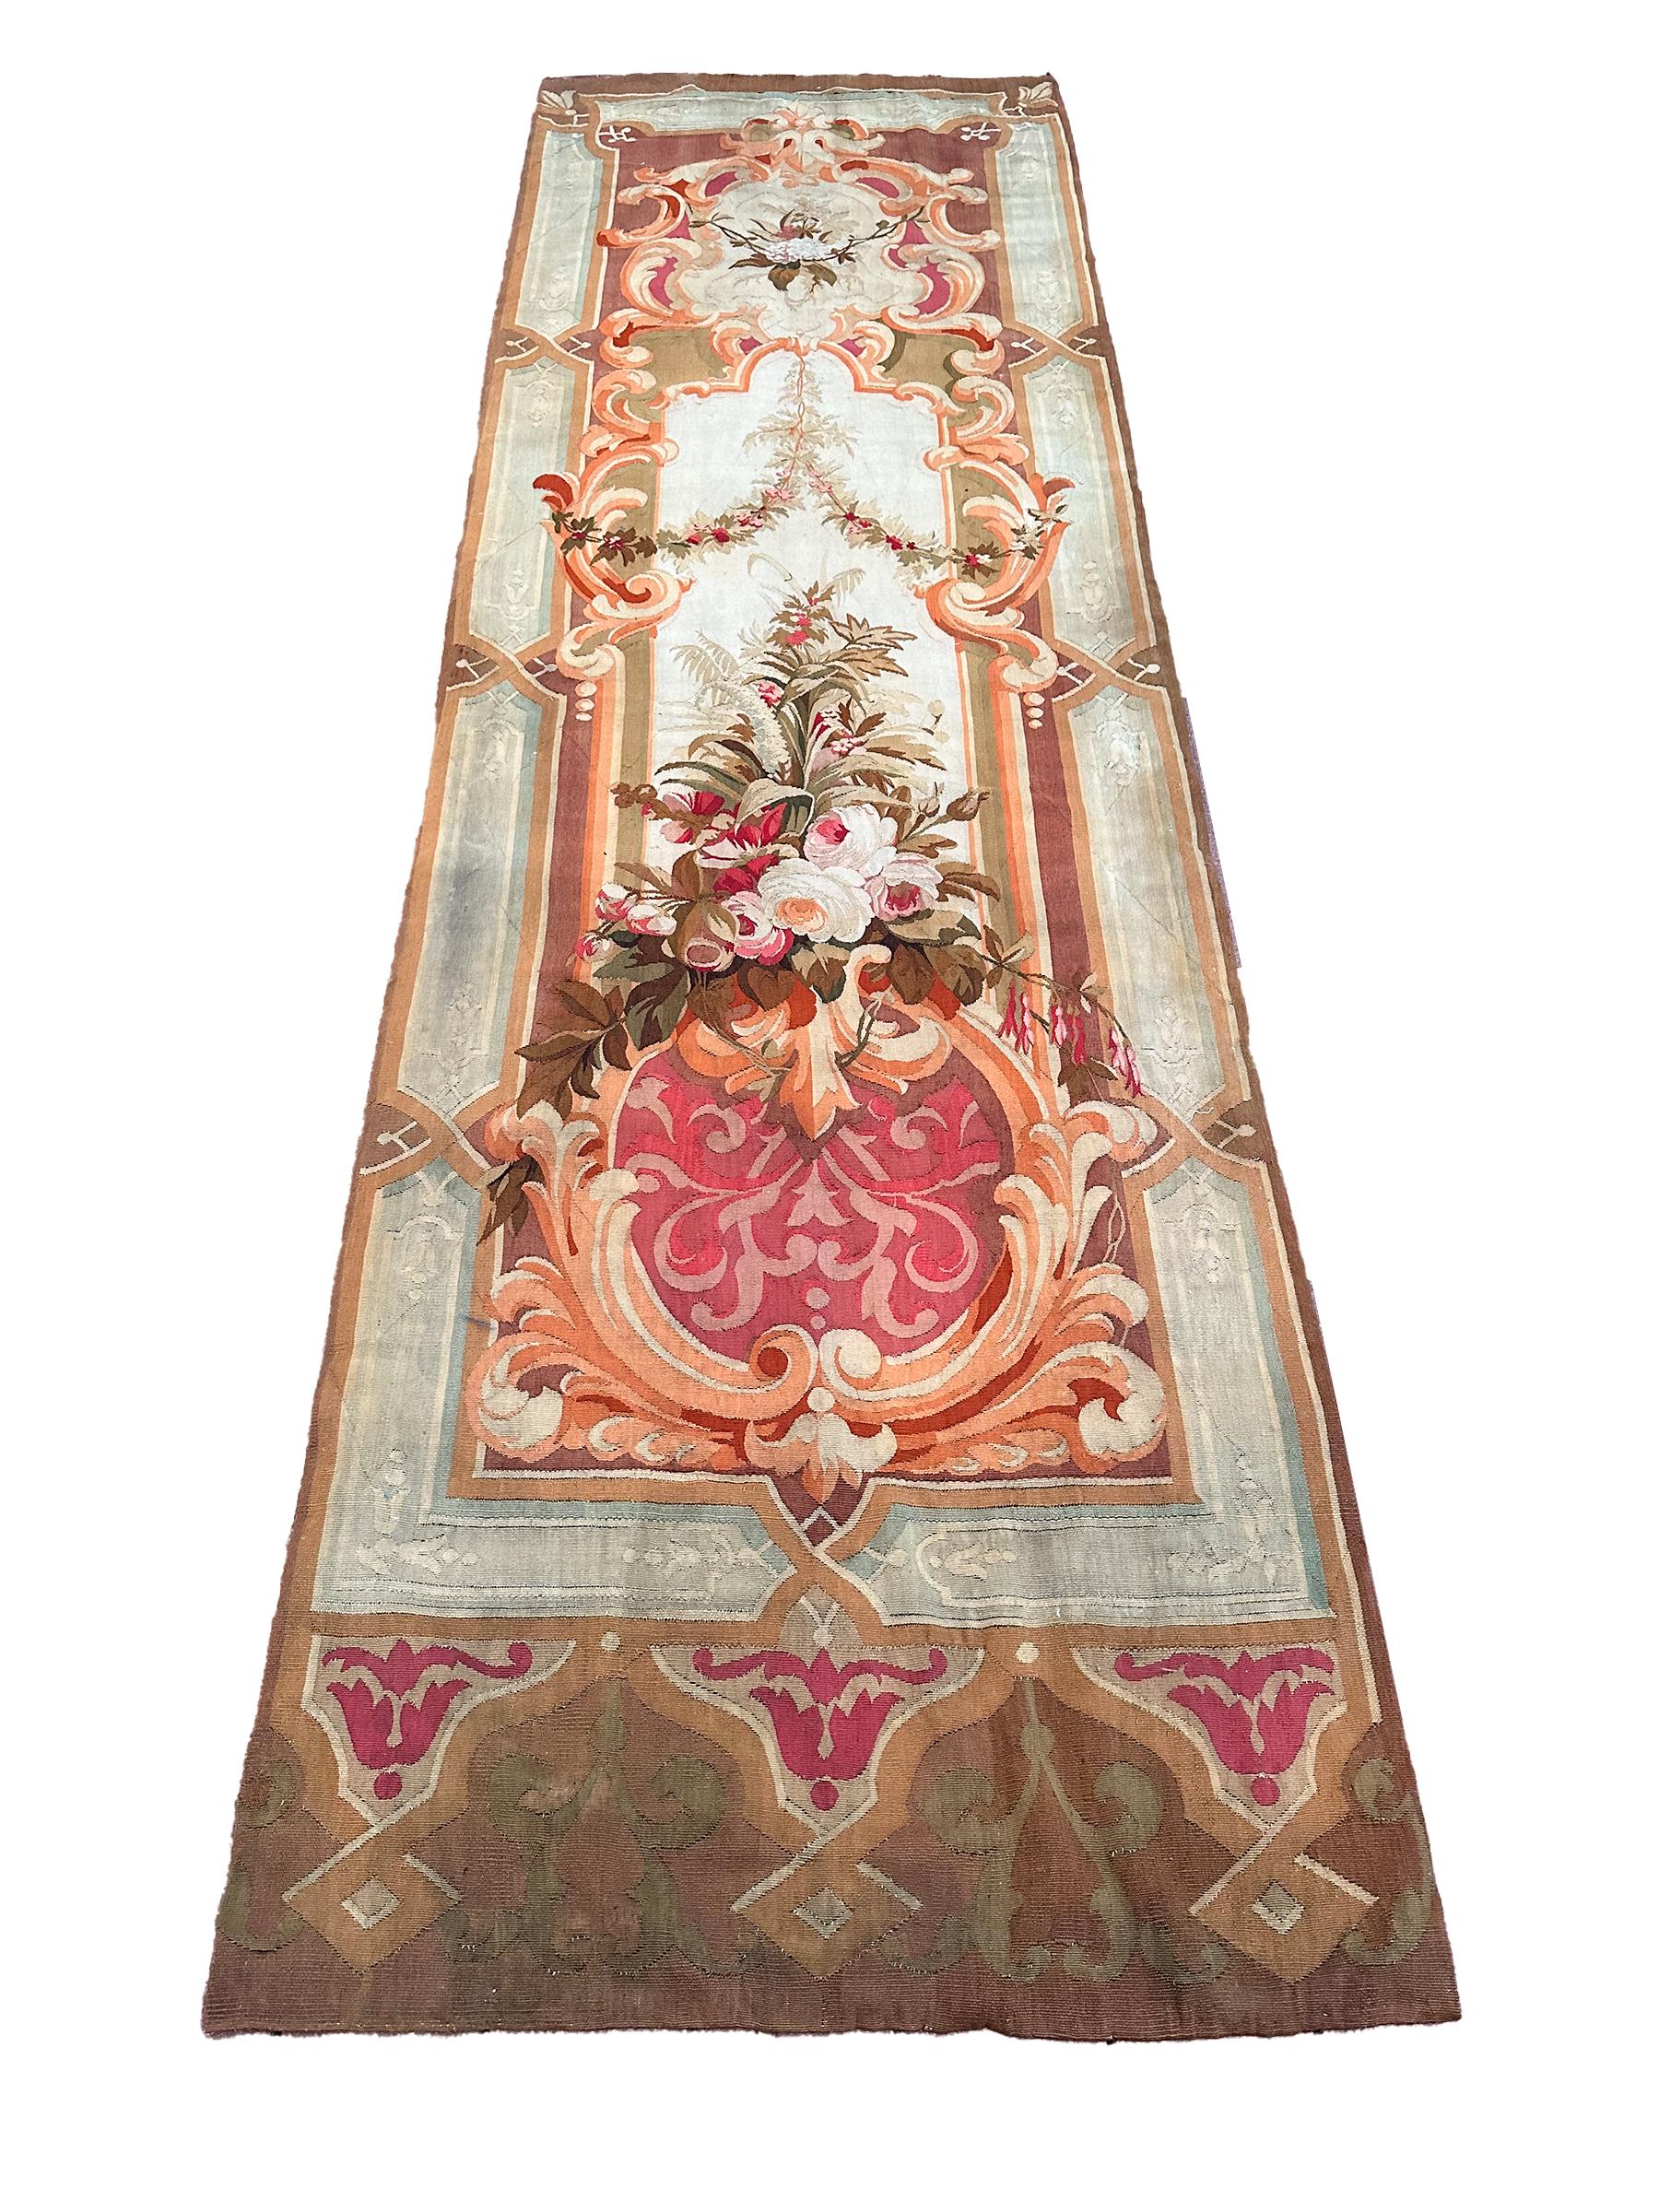 Hand-Woven 1920 Antique French Aubusson Tapestry Rug Floral Vase Runner 3x10 1880 97x287cm For Sale